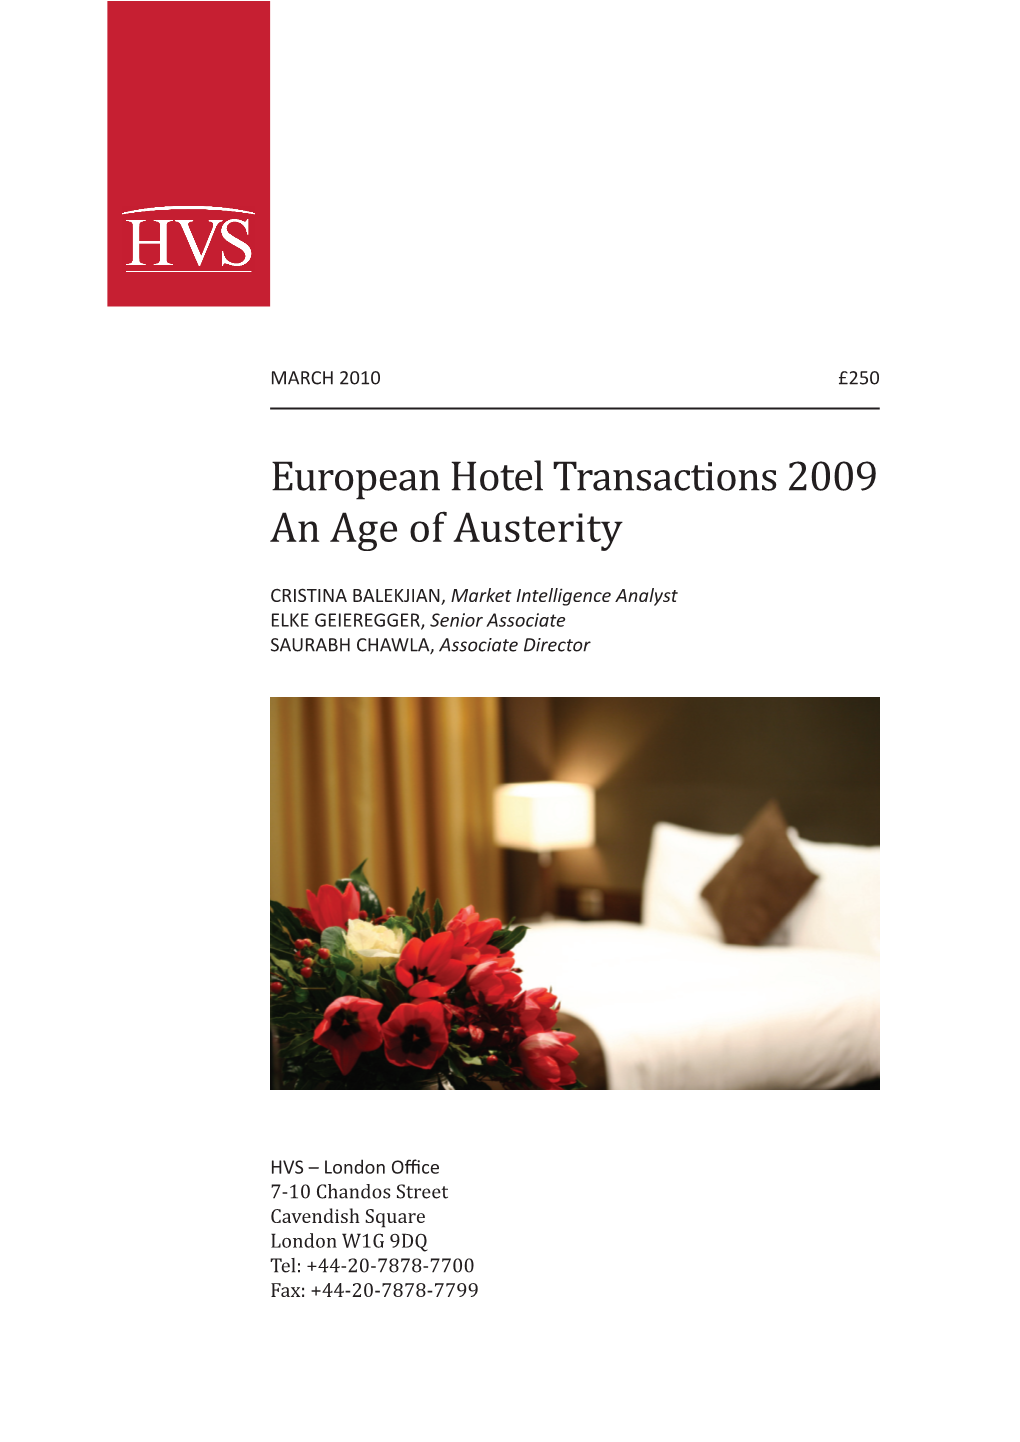 European Hotel Transactions 2009 an Age of Austerity